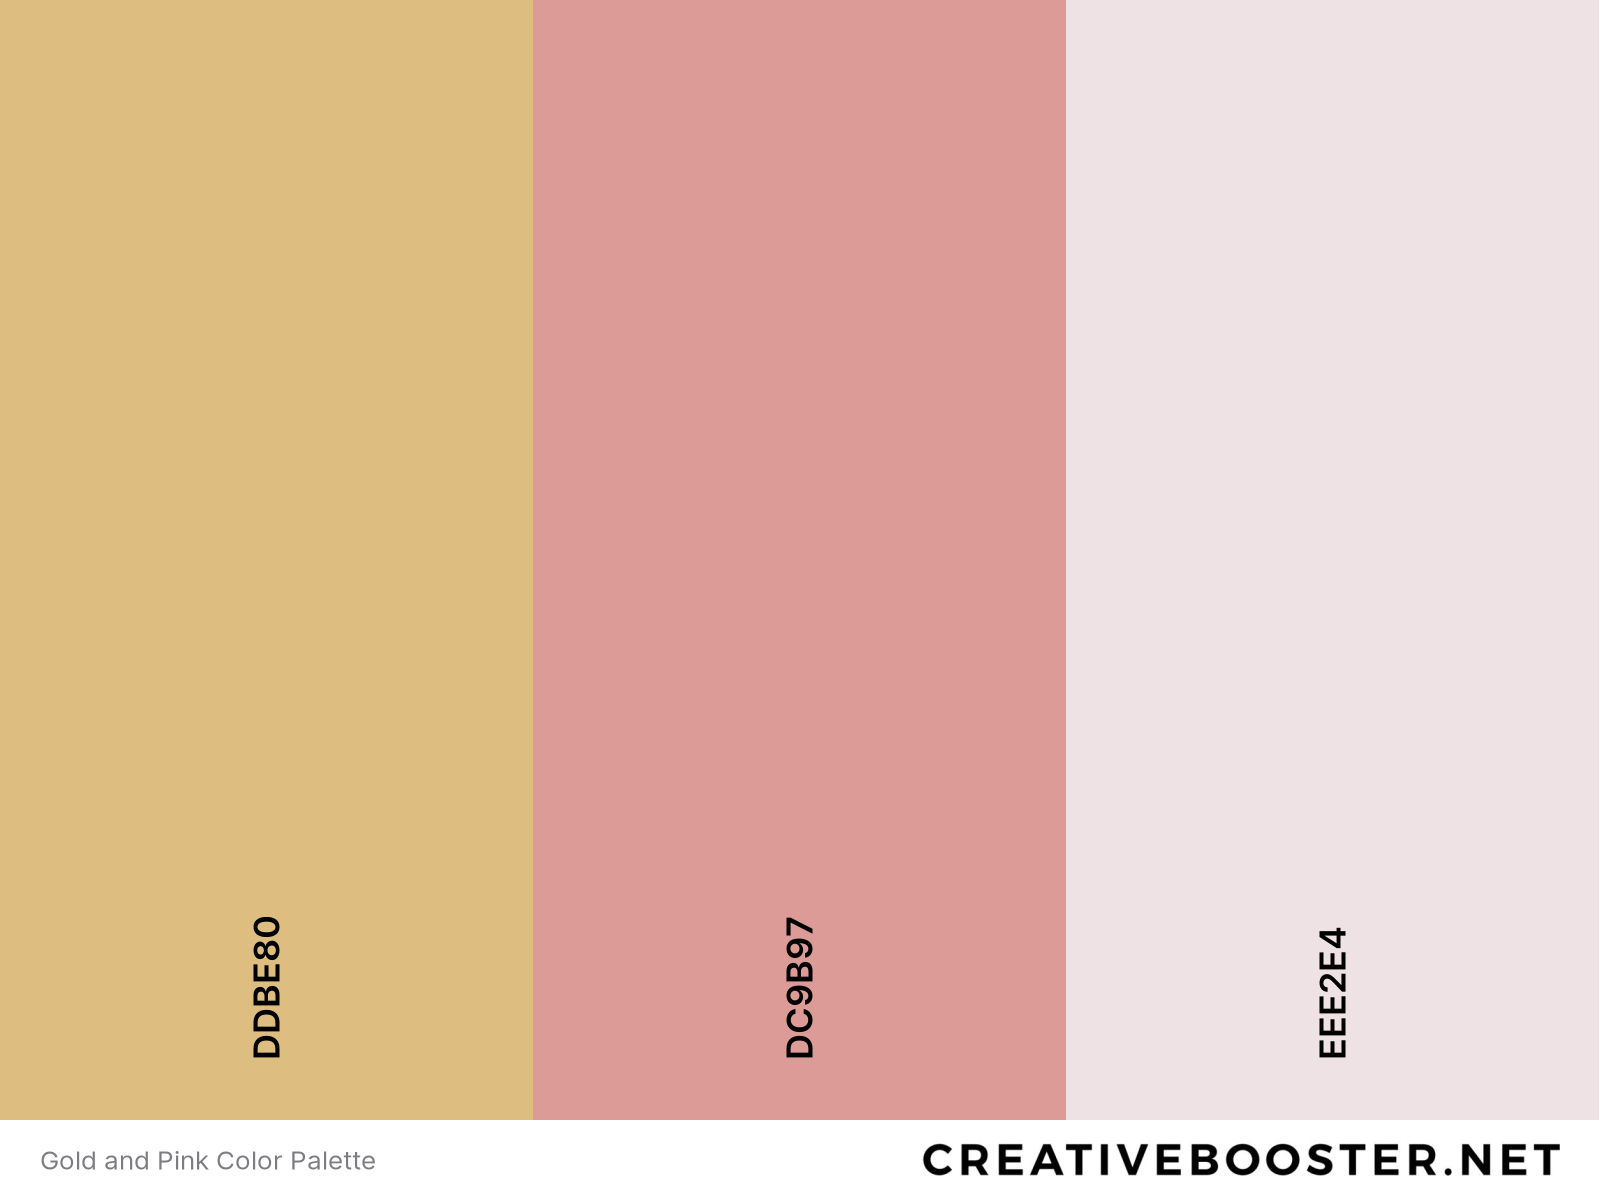 Gold and Pink Color Palette